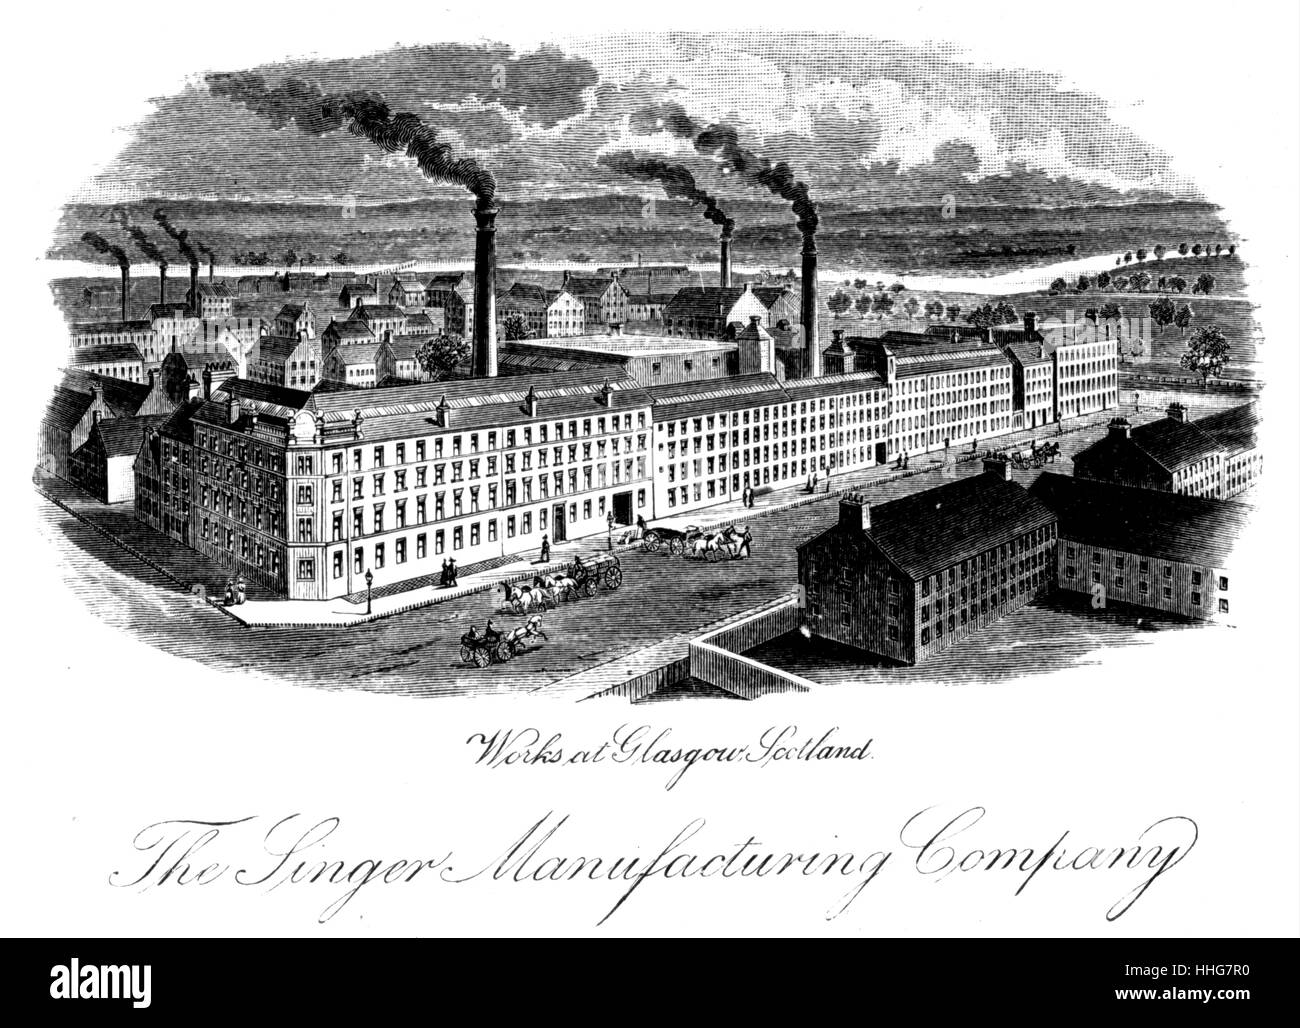 Singer Sewing Machine Factory, Glasgow. (ca 1885) Stock Photo